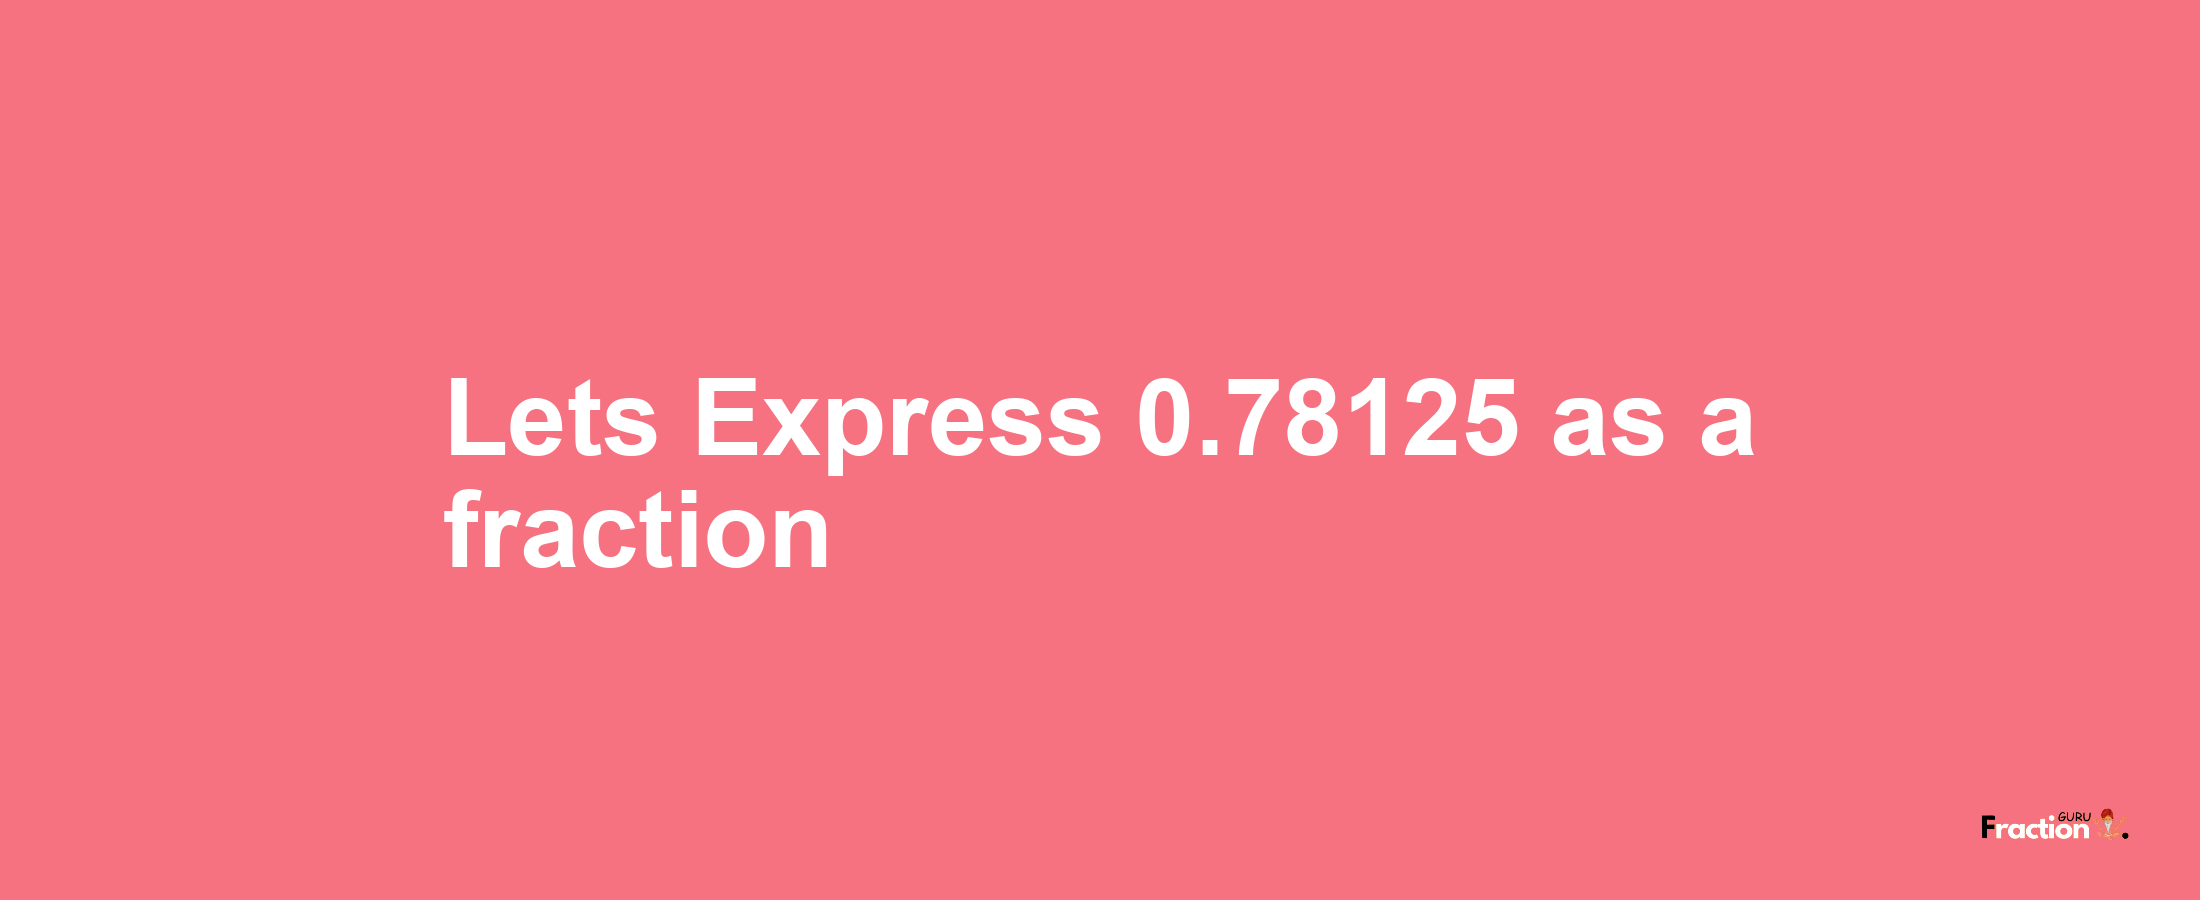 Lets Express 0.78125 as afraction